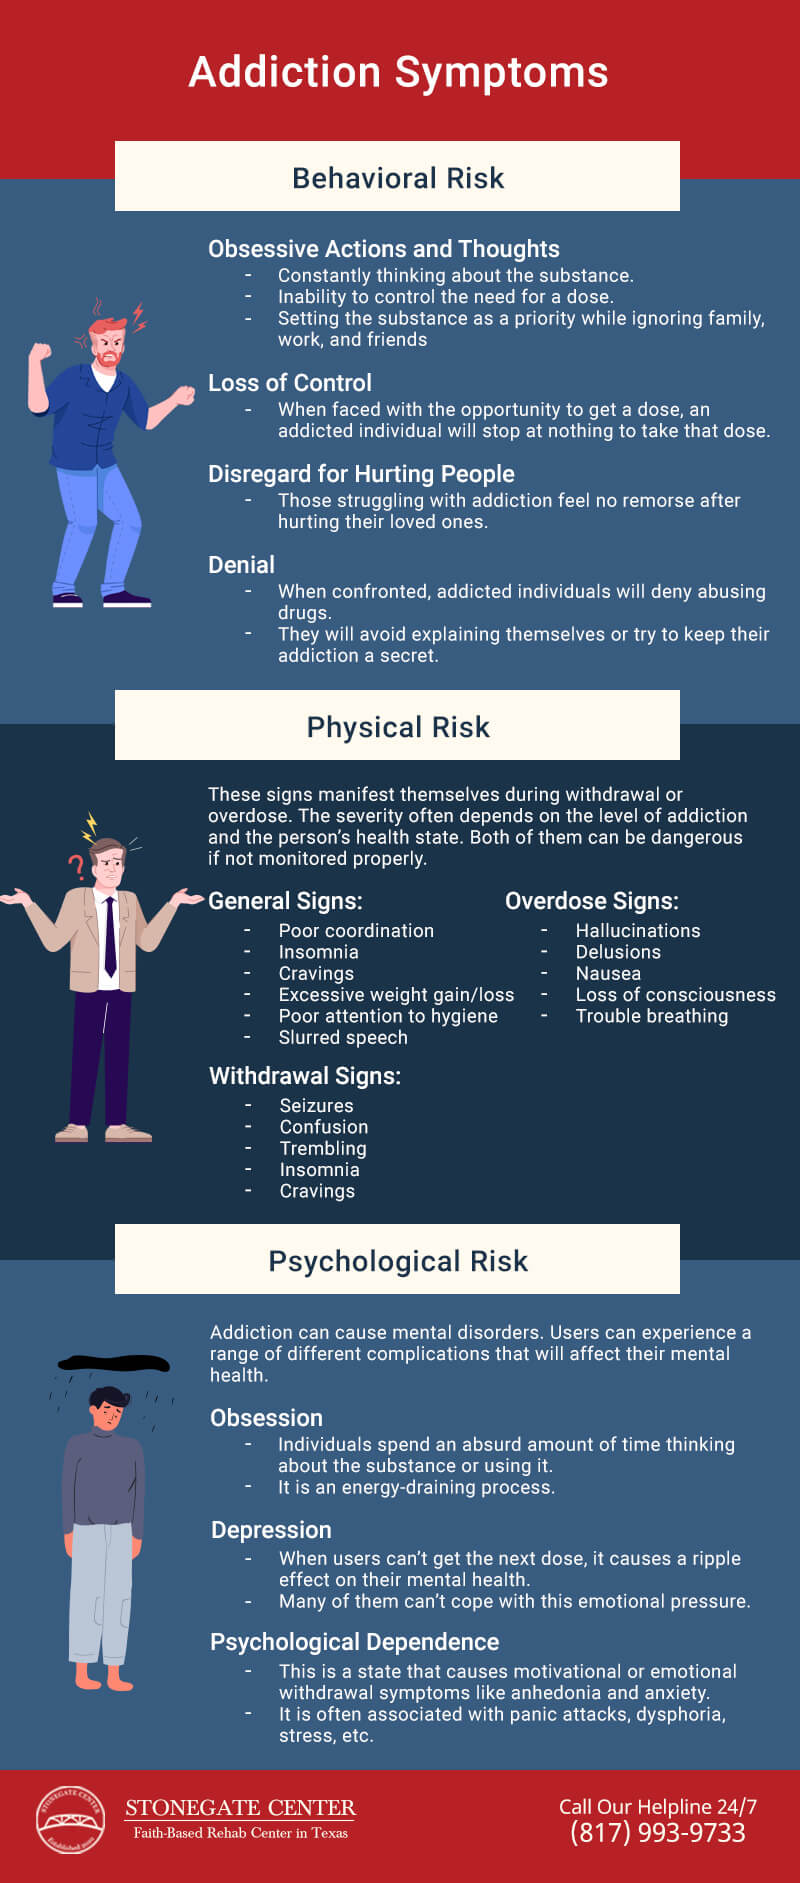 Stonegate Center Blog - Parkinson's Disease Can Tell Us About Addiction - Addiction Symptoms Infographics